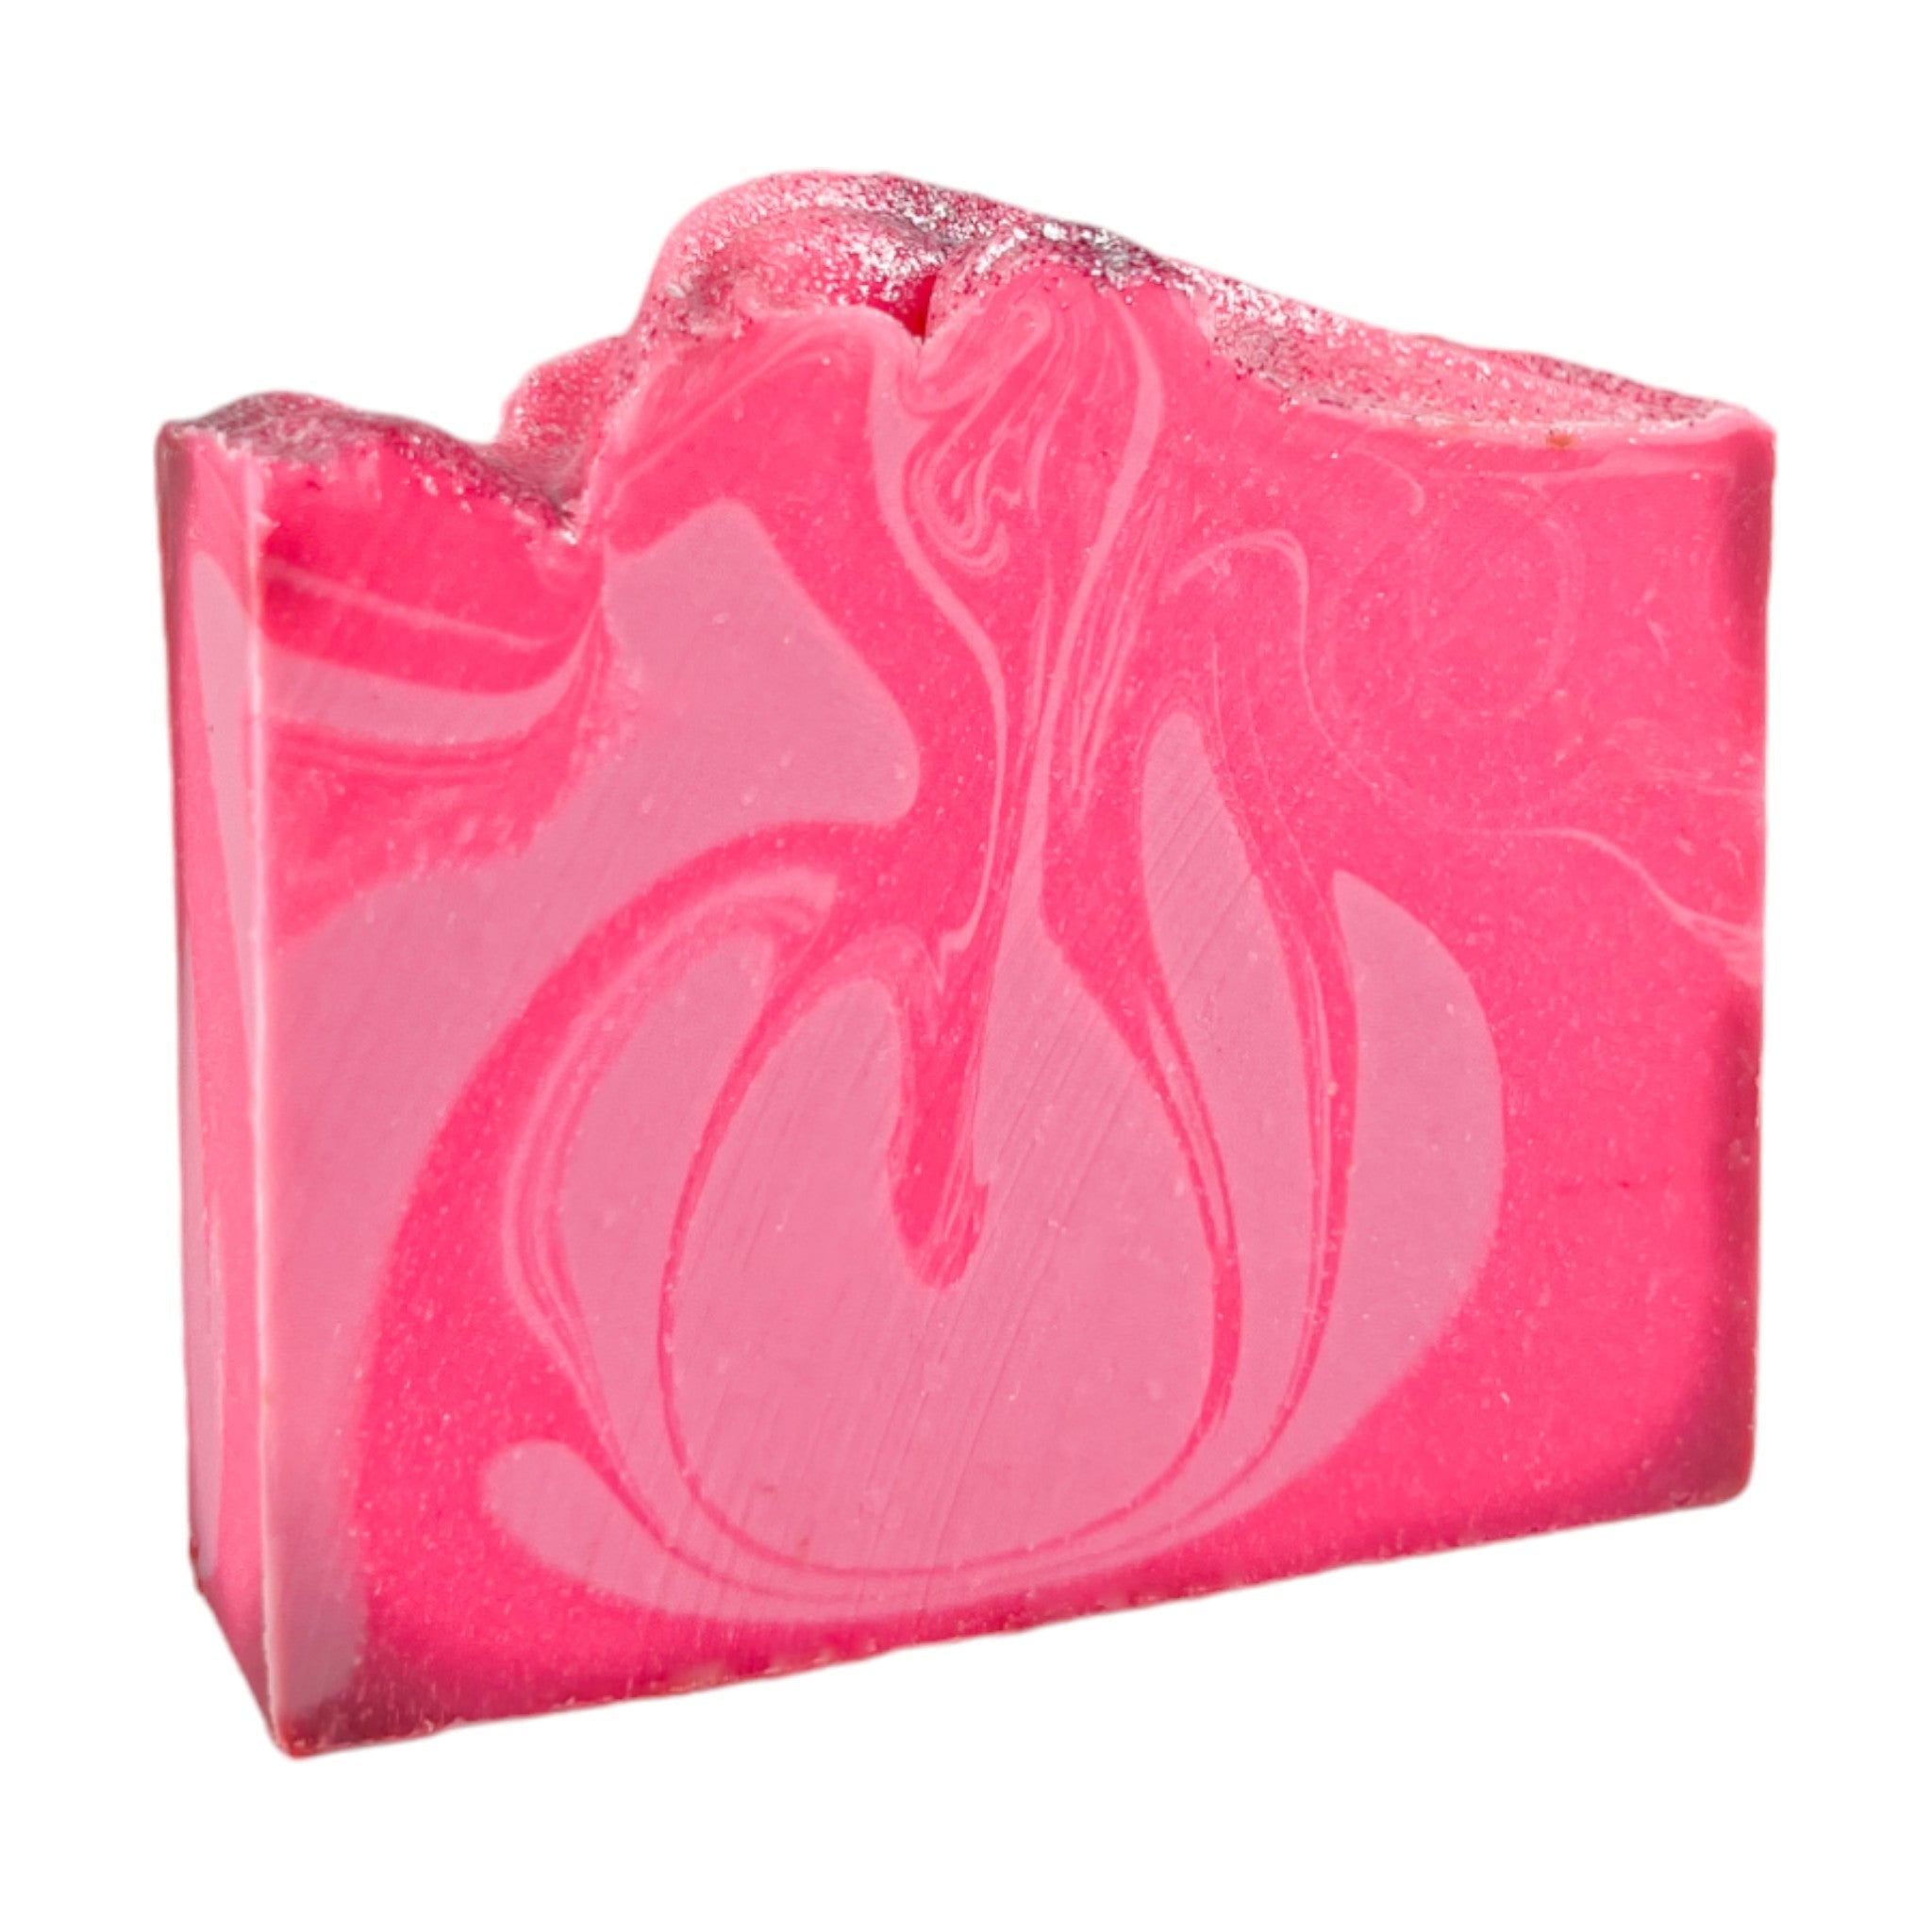 Pink Sugar -Bar Soap - Old Town Soap Co.